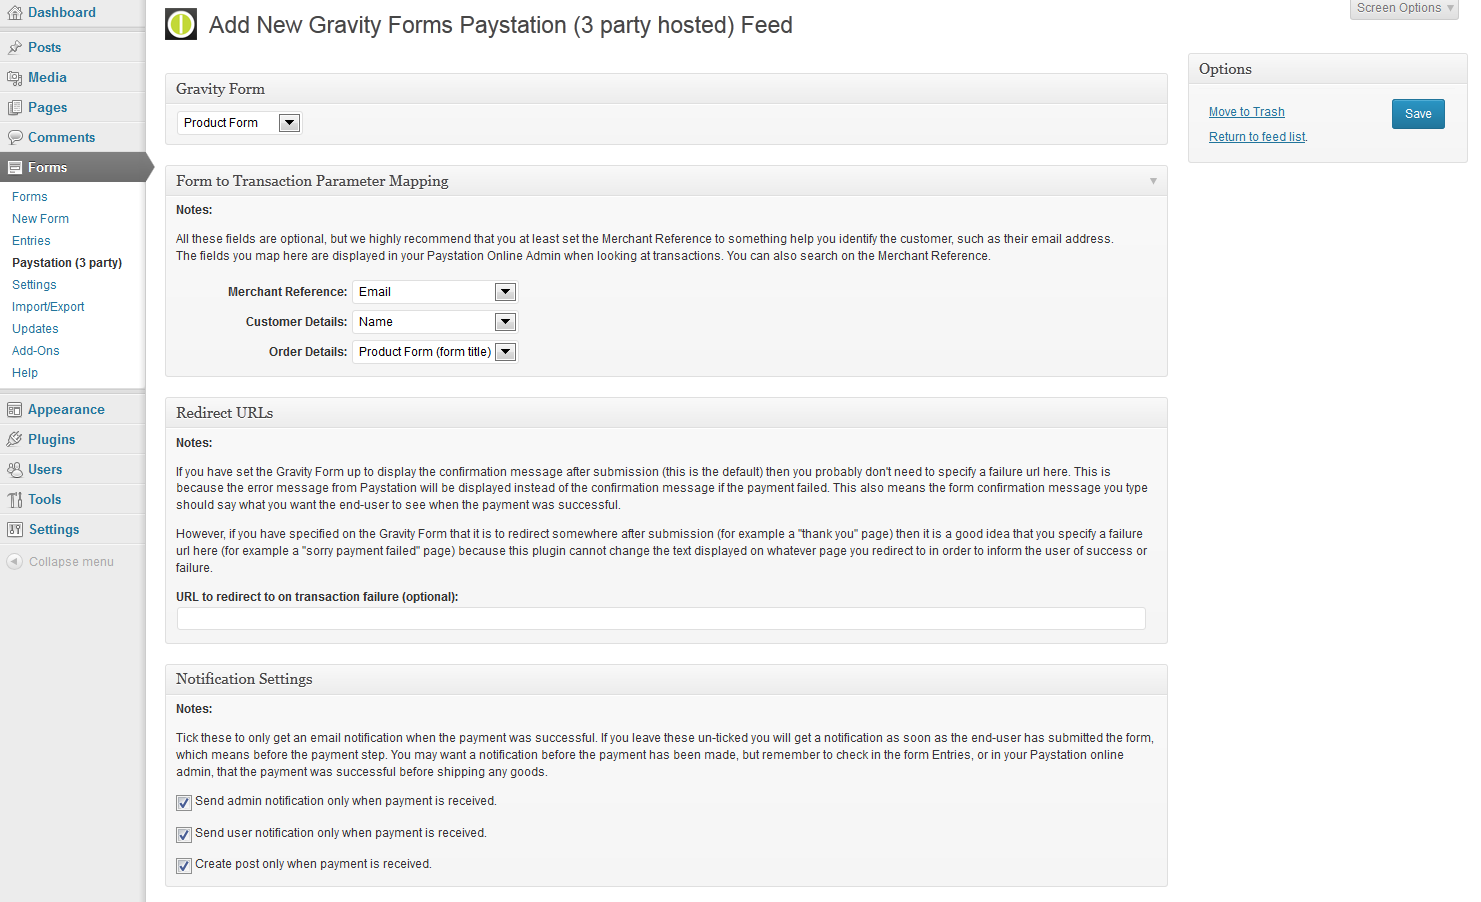 Add new Paystation (3 party hosted) feed - mapping form fields to API parameters.